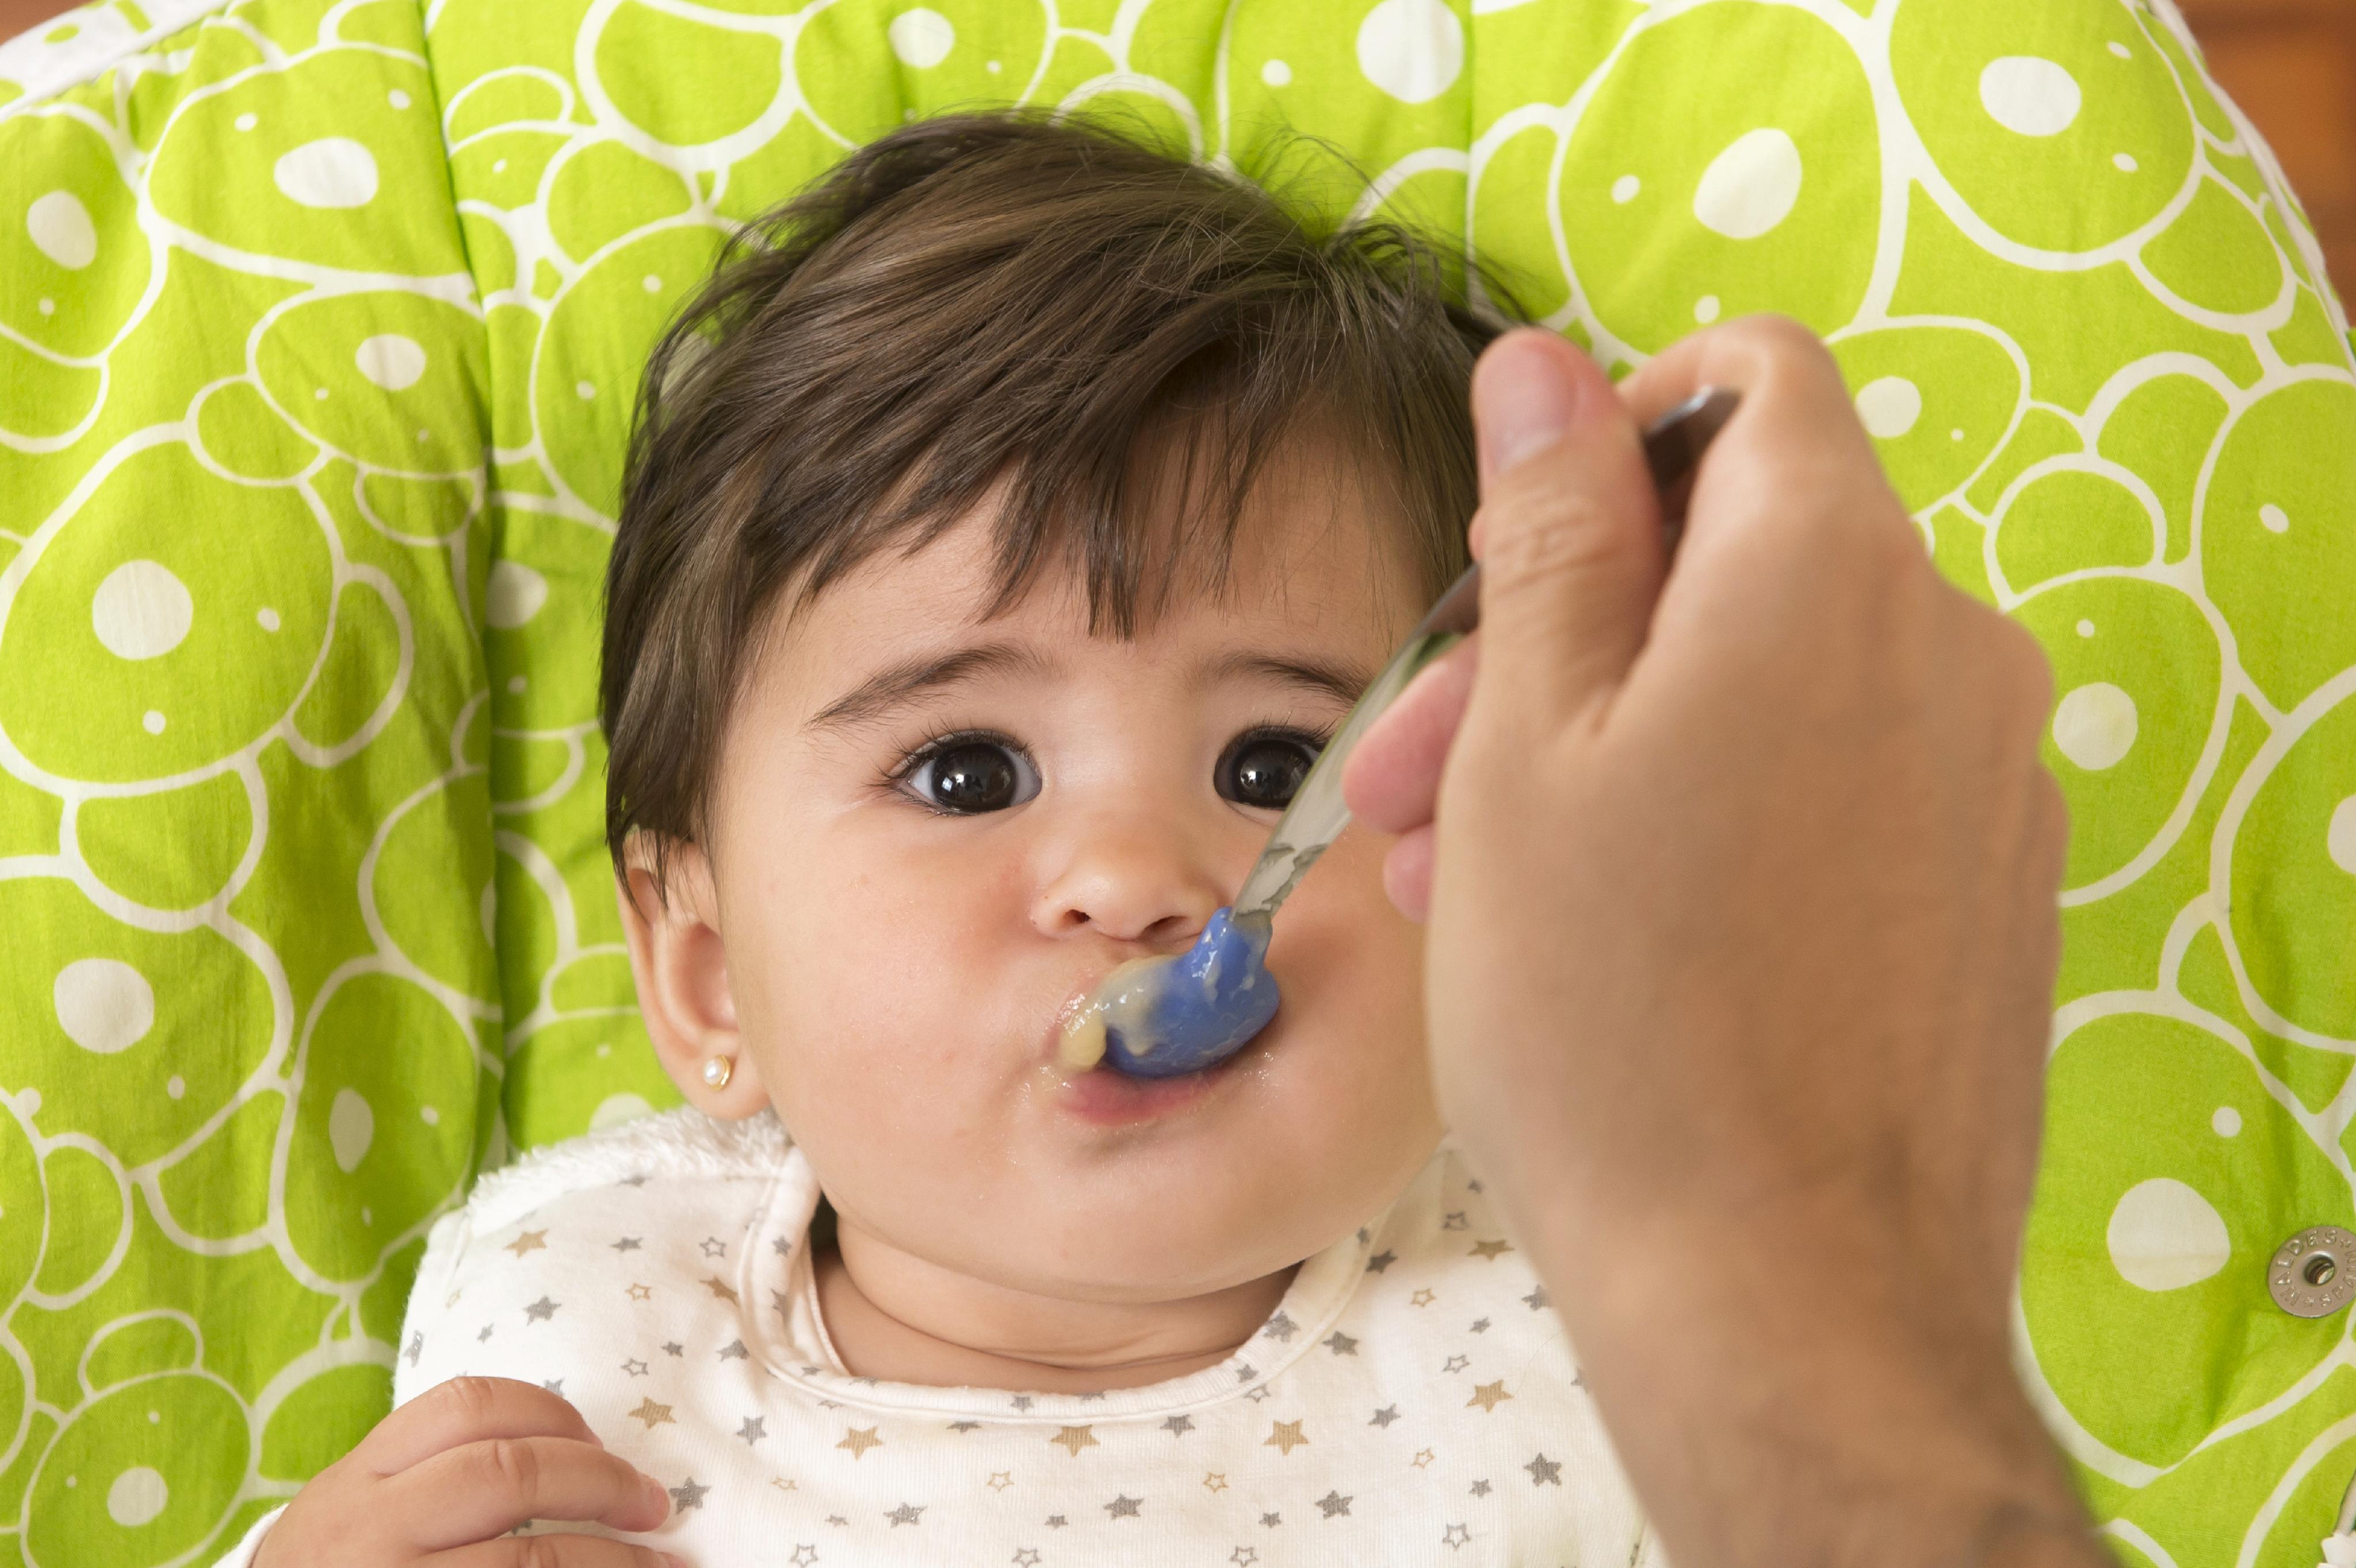 Baby Nutrition: Nutritional Needs for Infants During the First 12 Months